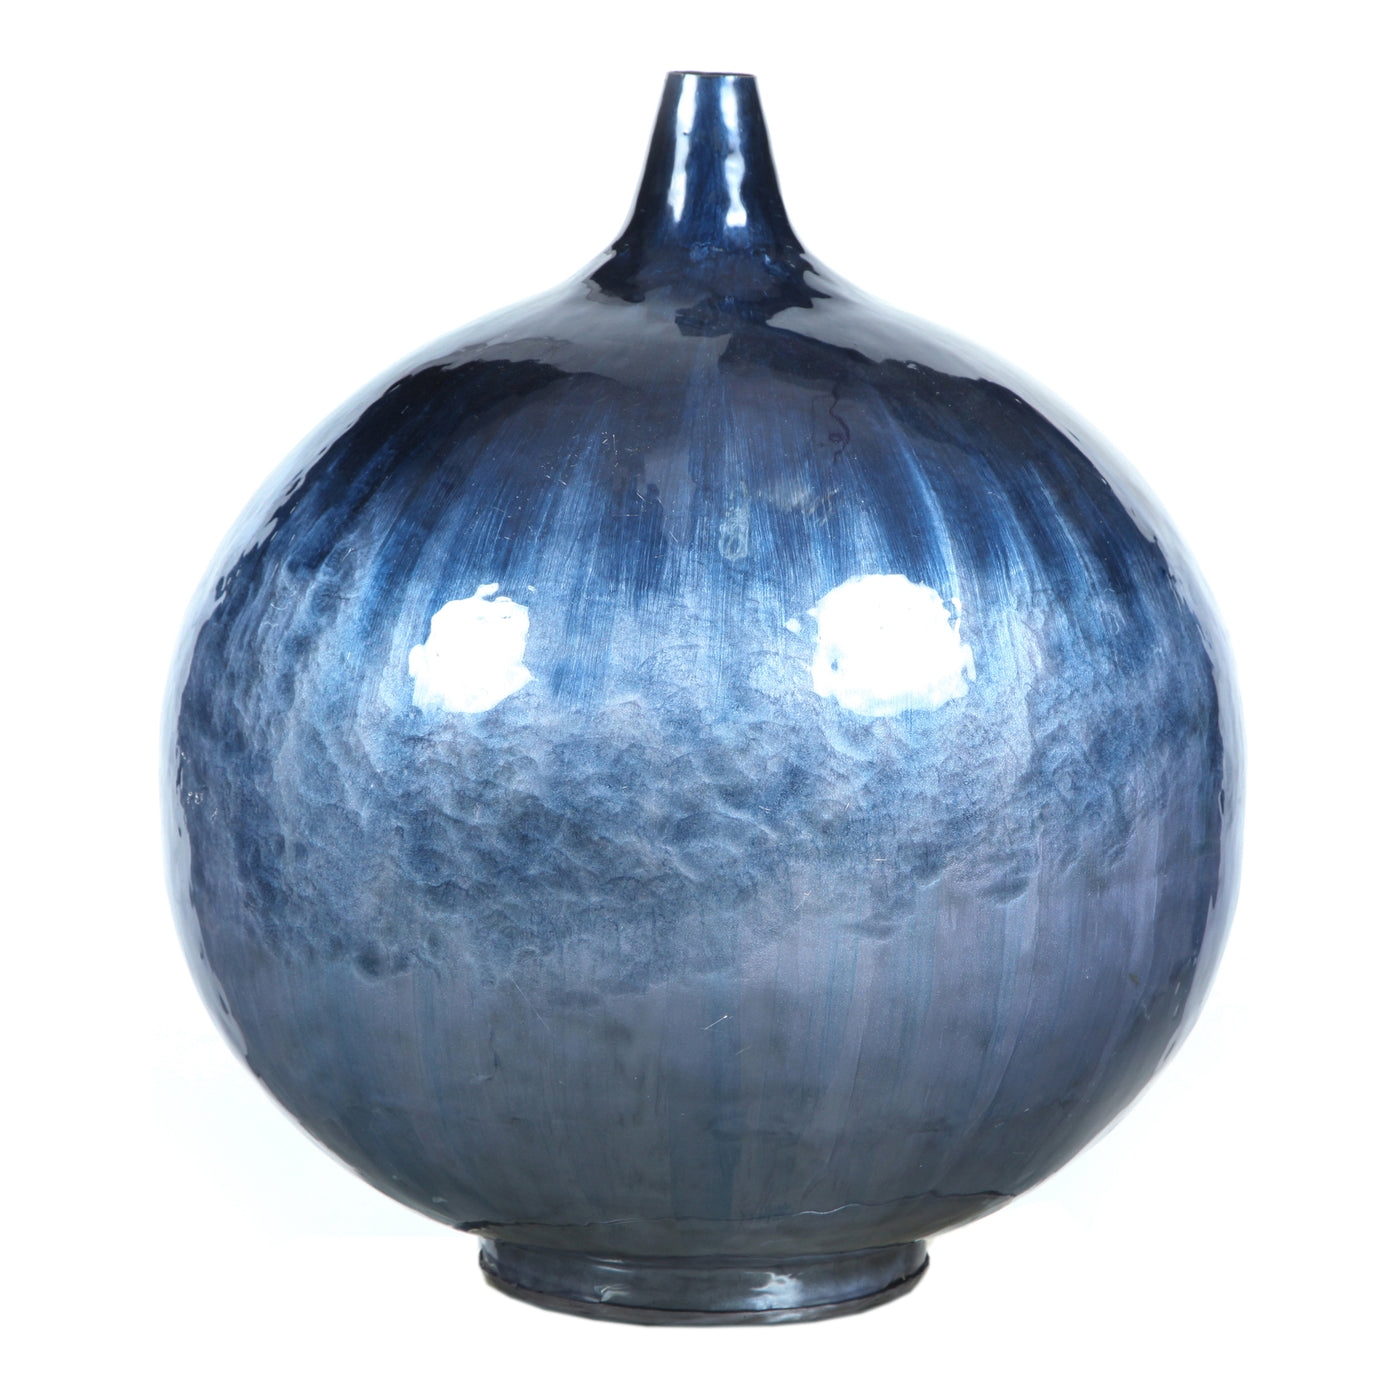 A deep blue glaze fades in the Abaco Vase. Filled with fresh or dried flowers, this vase adds a pop of color to any space....